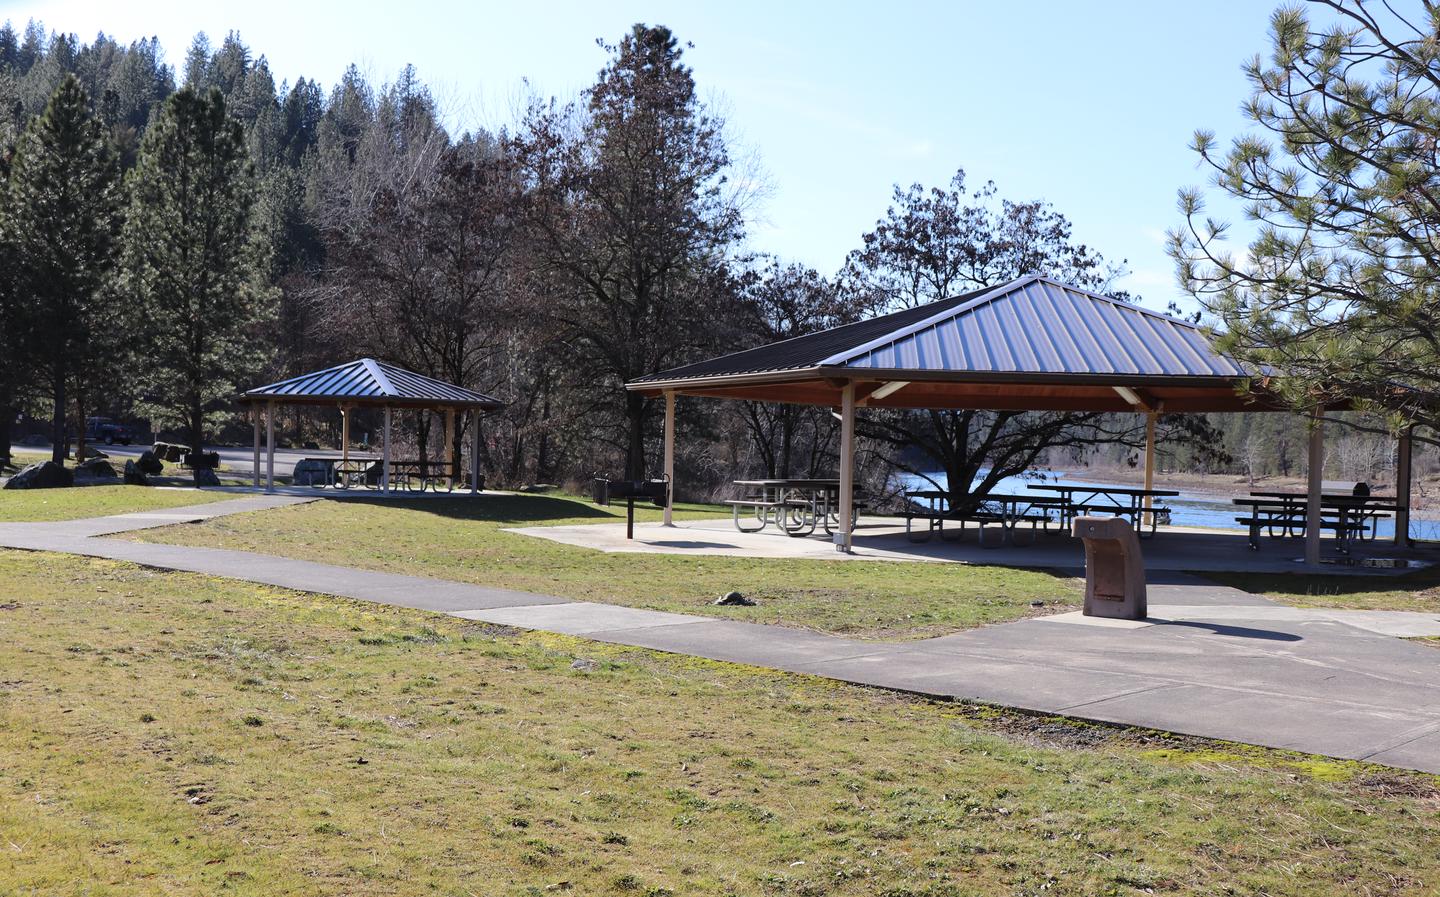 Two day use pavilions available at Pink House Recreation Sites.There are two group pavilions available for day-use only. The pavilions are reservable through Recreation.gov. Both pavilions include electricity, lighting, standing BBQ grills, and accessible picnic tables. 